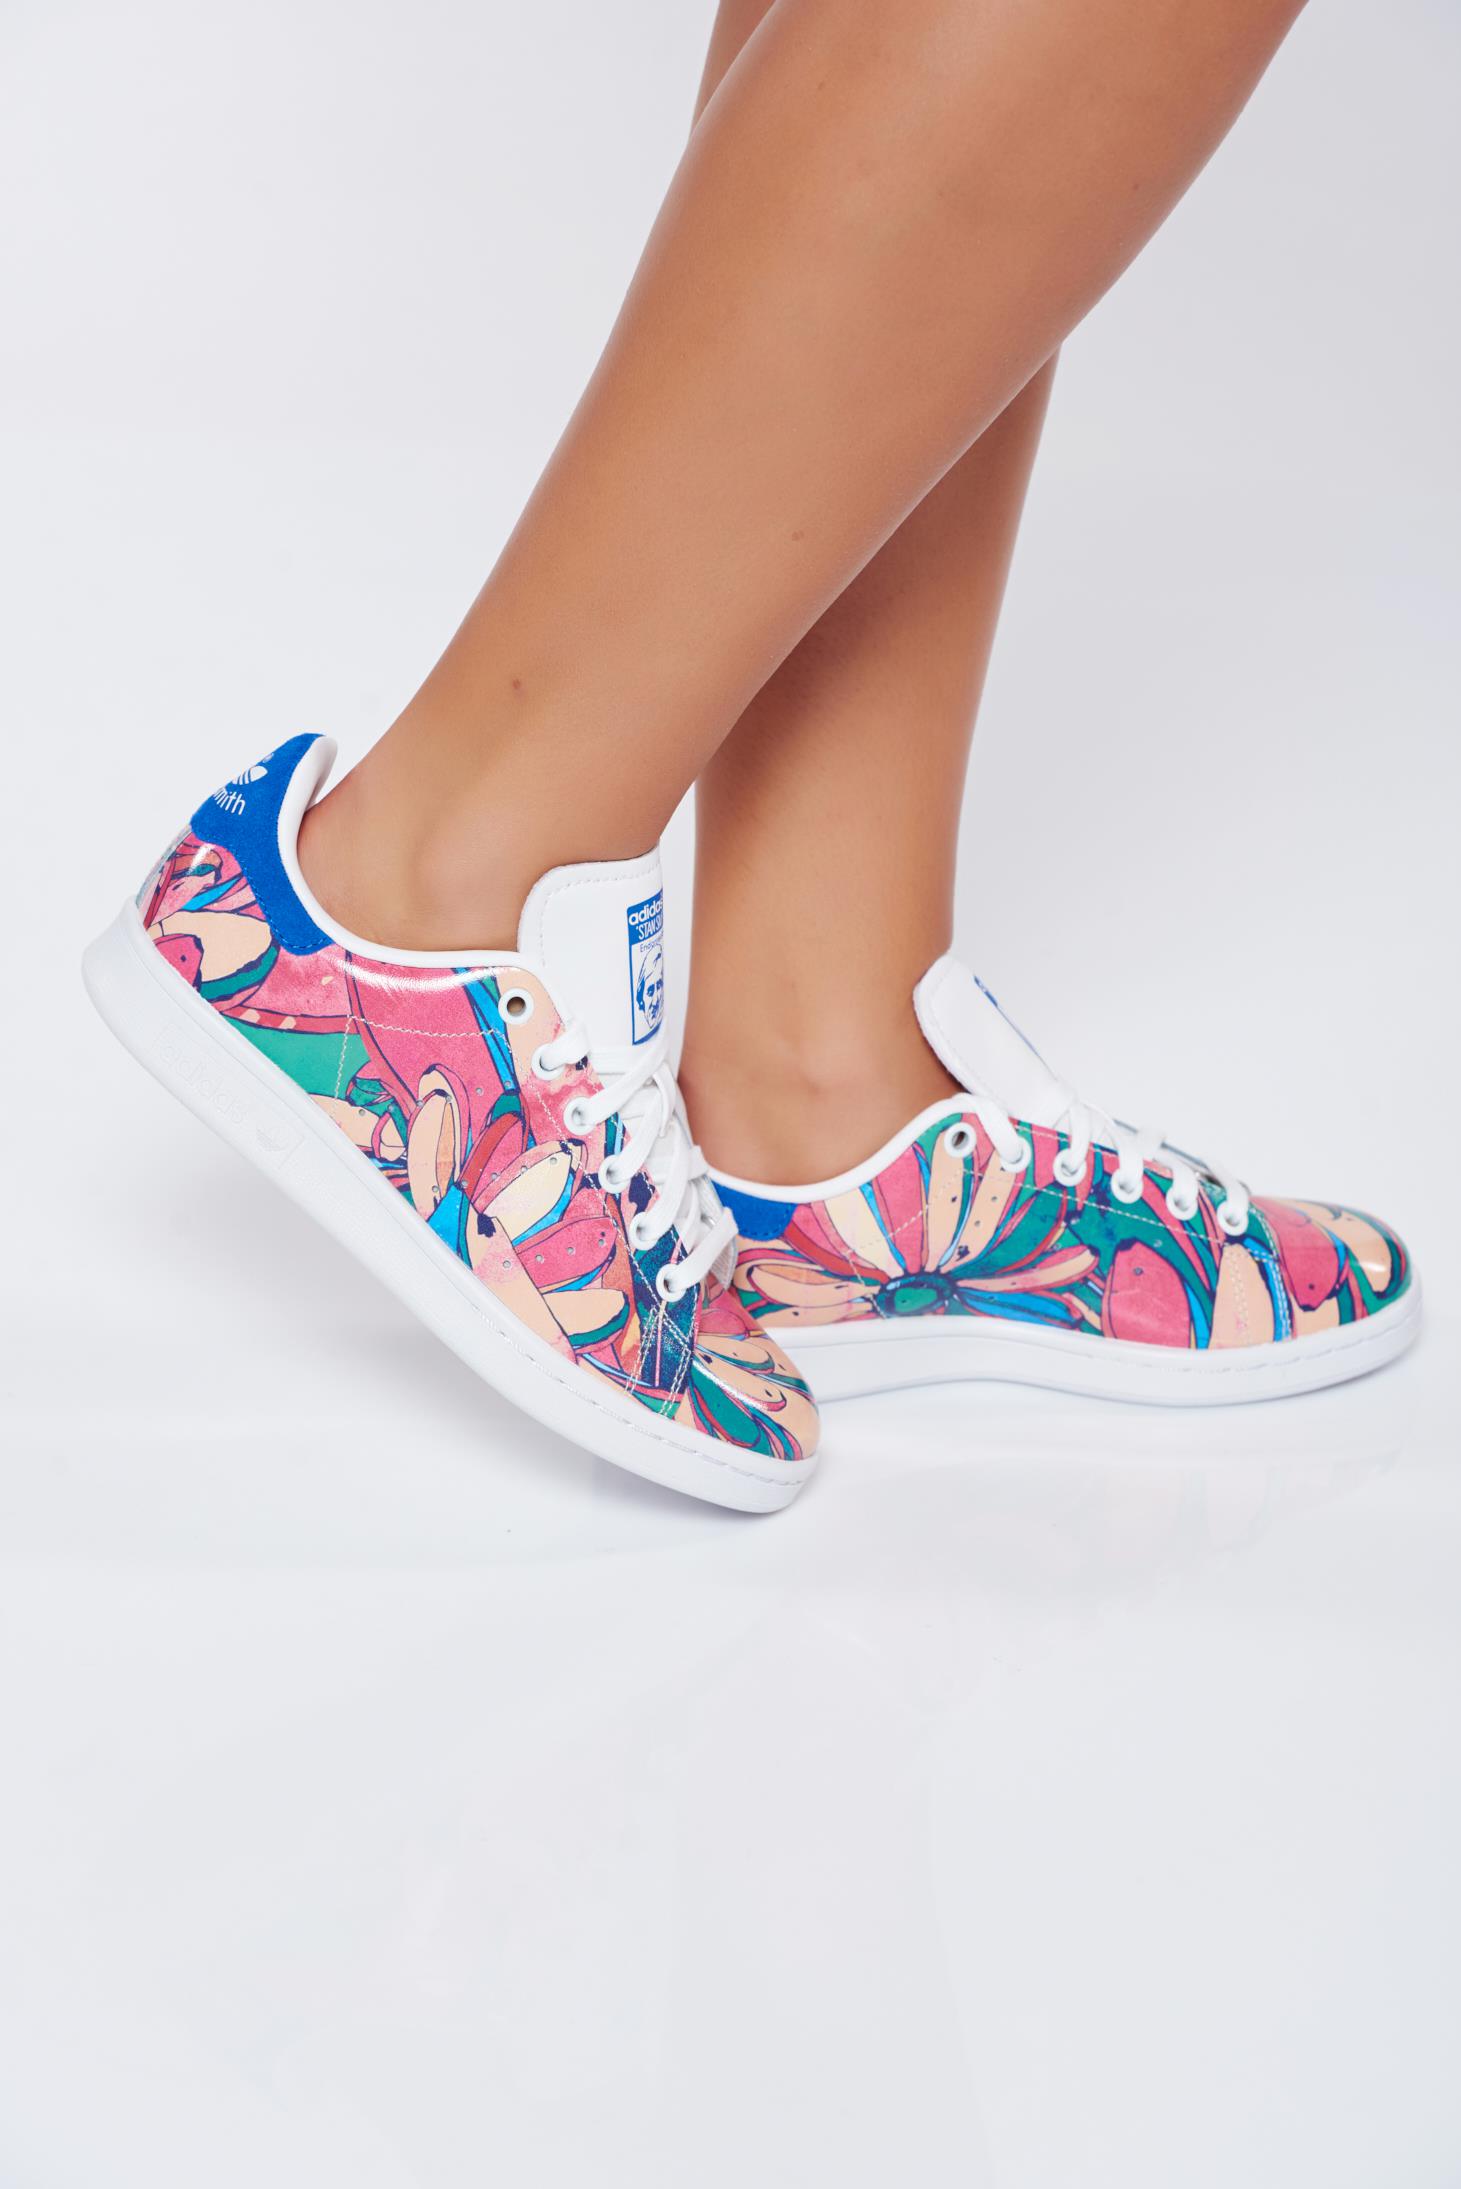 adidas floral sneakers